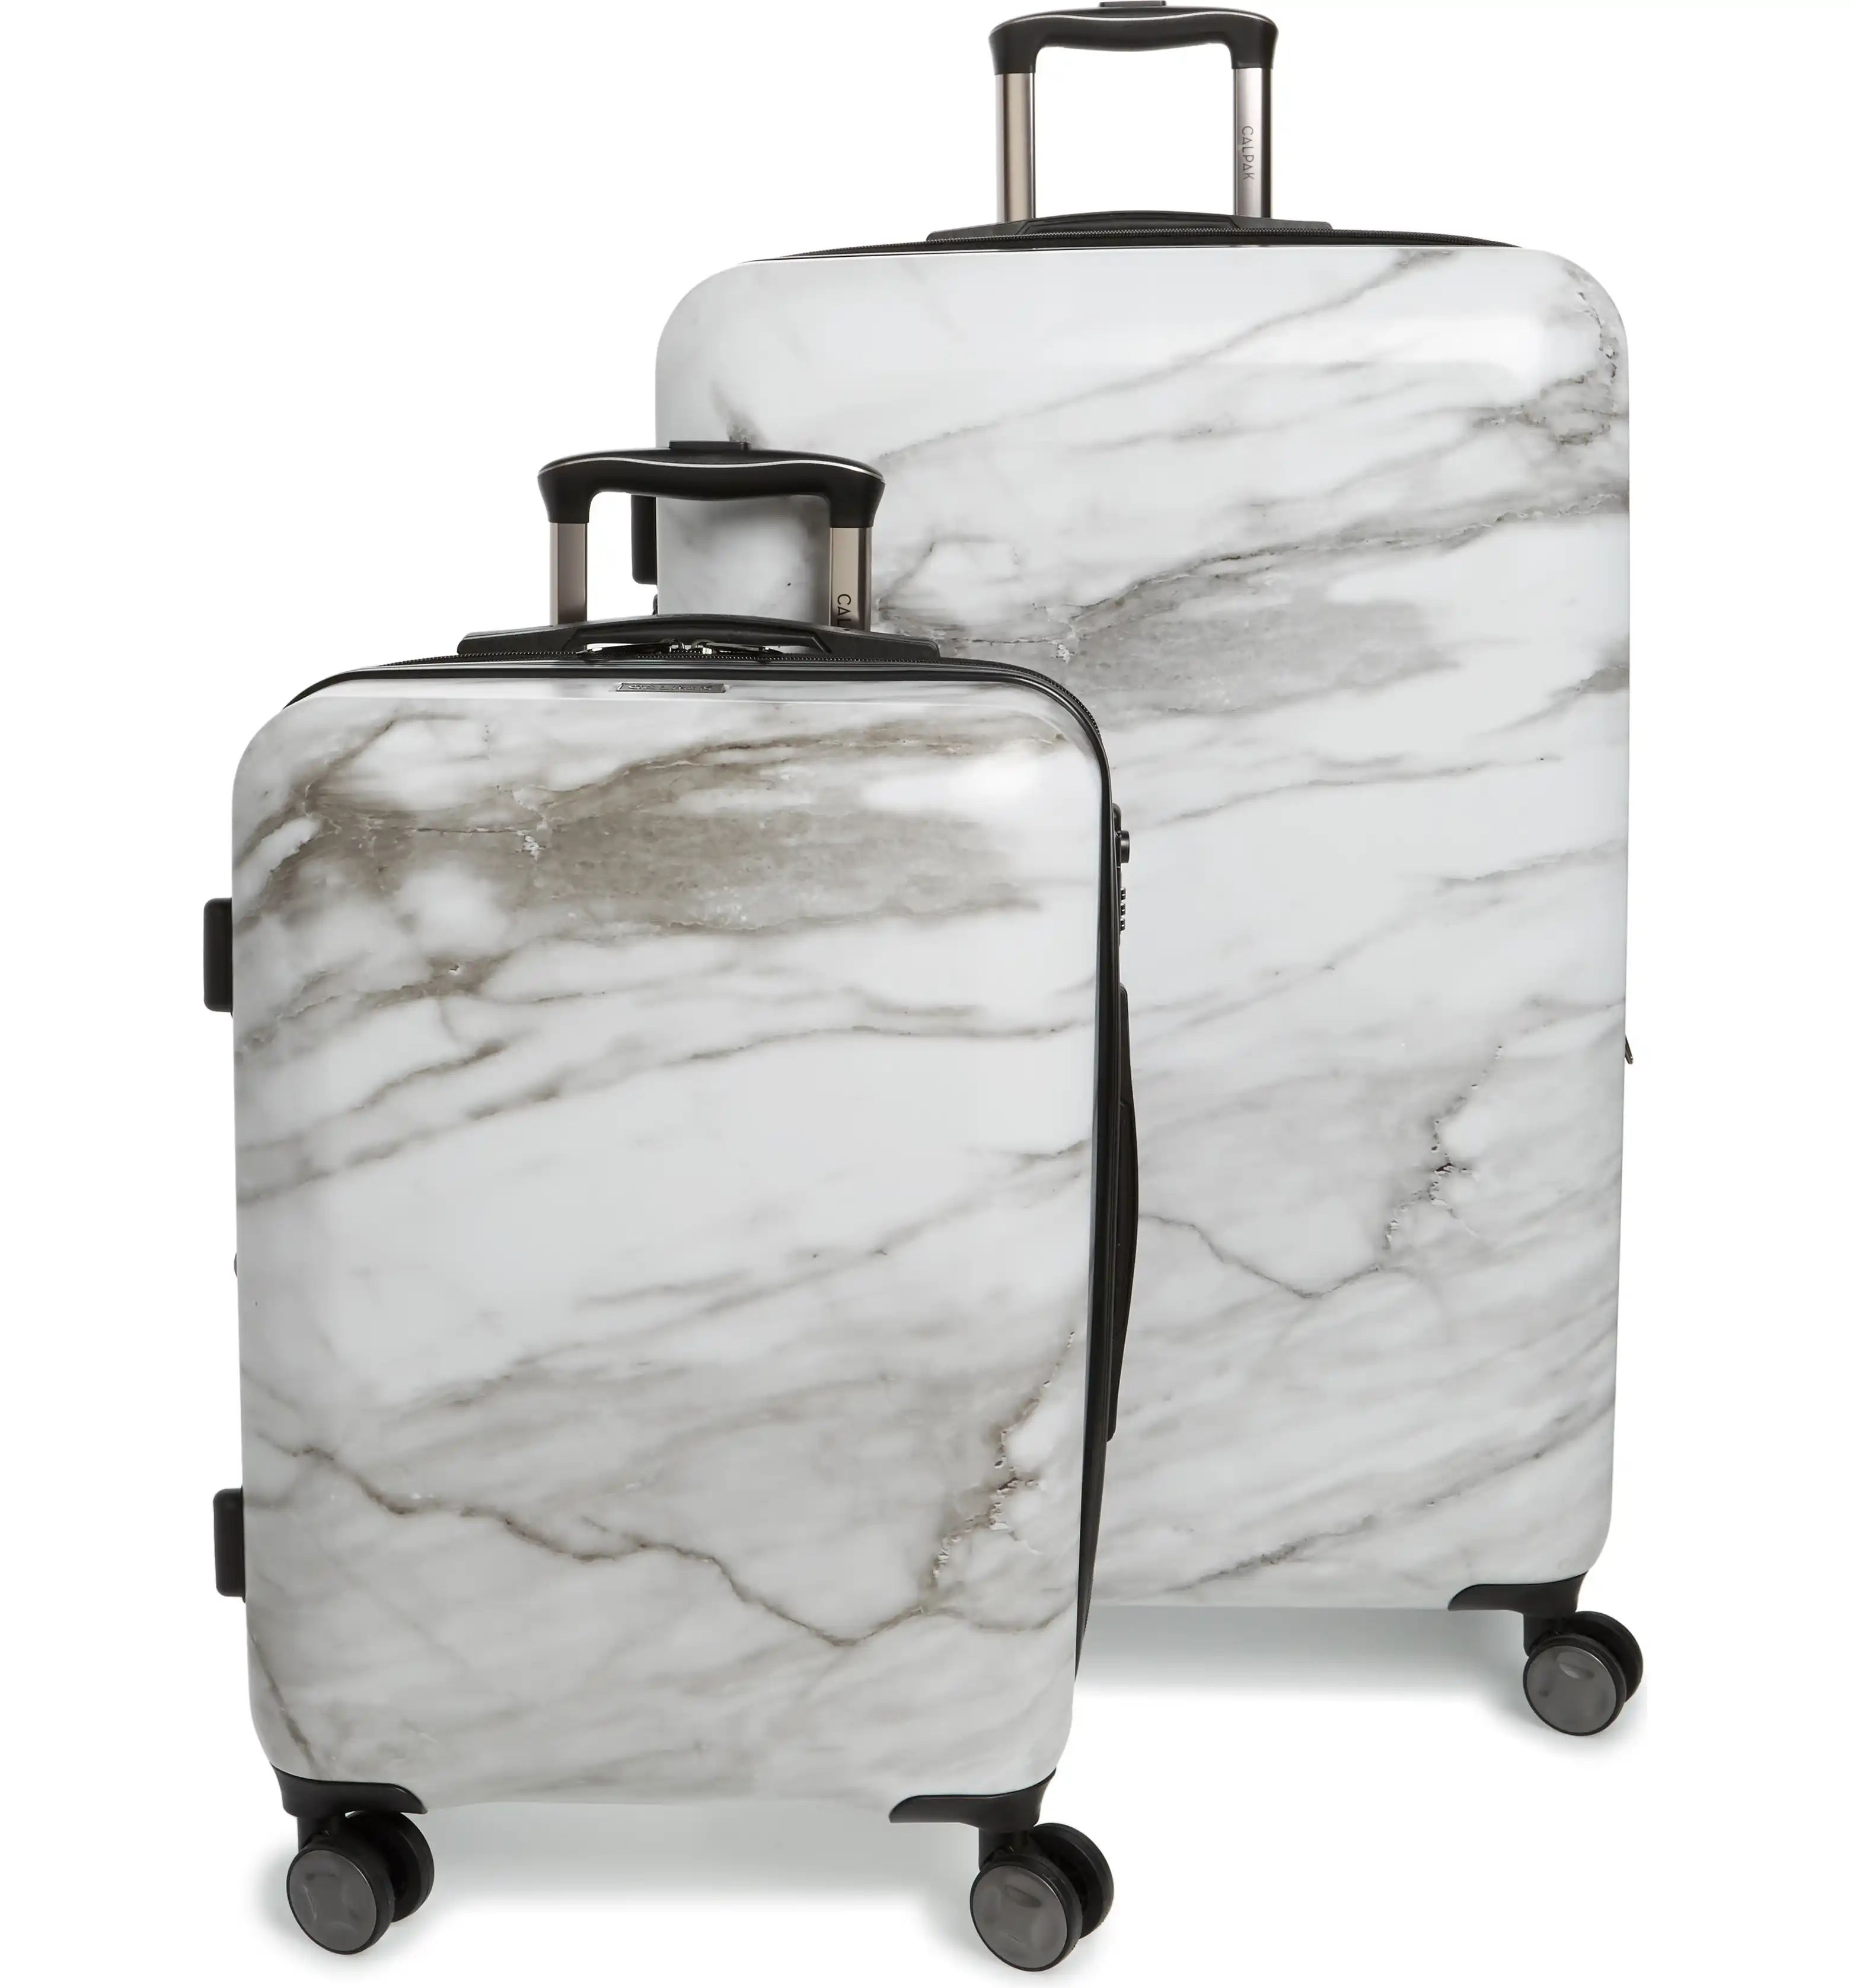 Astyll 22-Inch & 30-Inch Spinner Luggage Set | Nordstrom